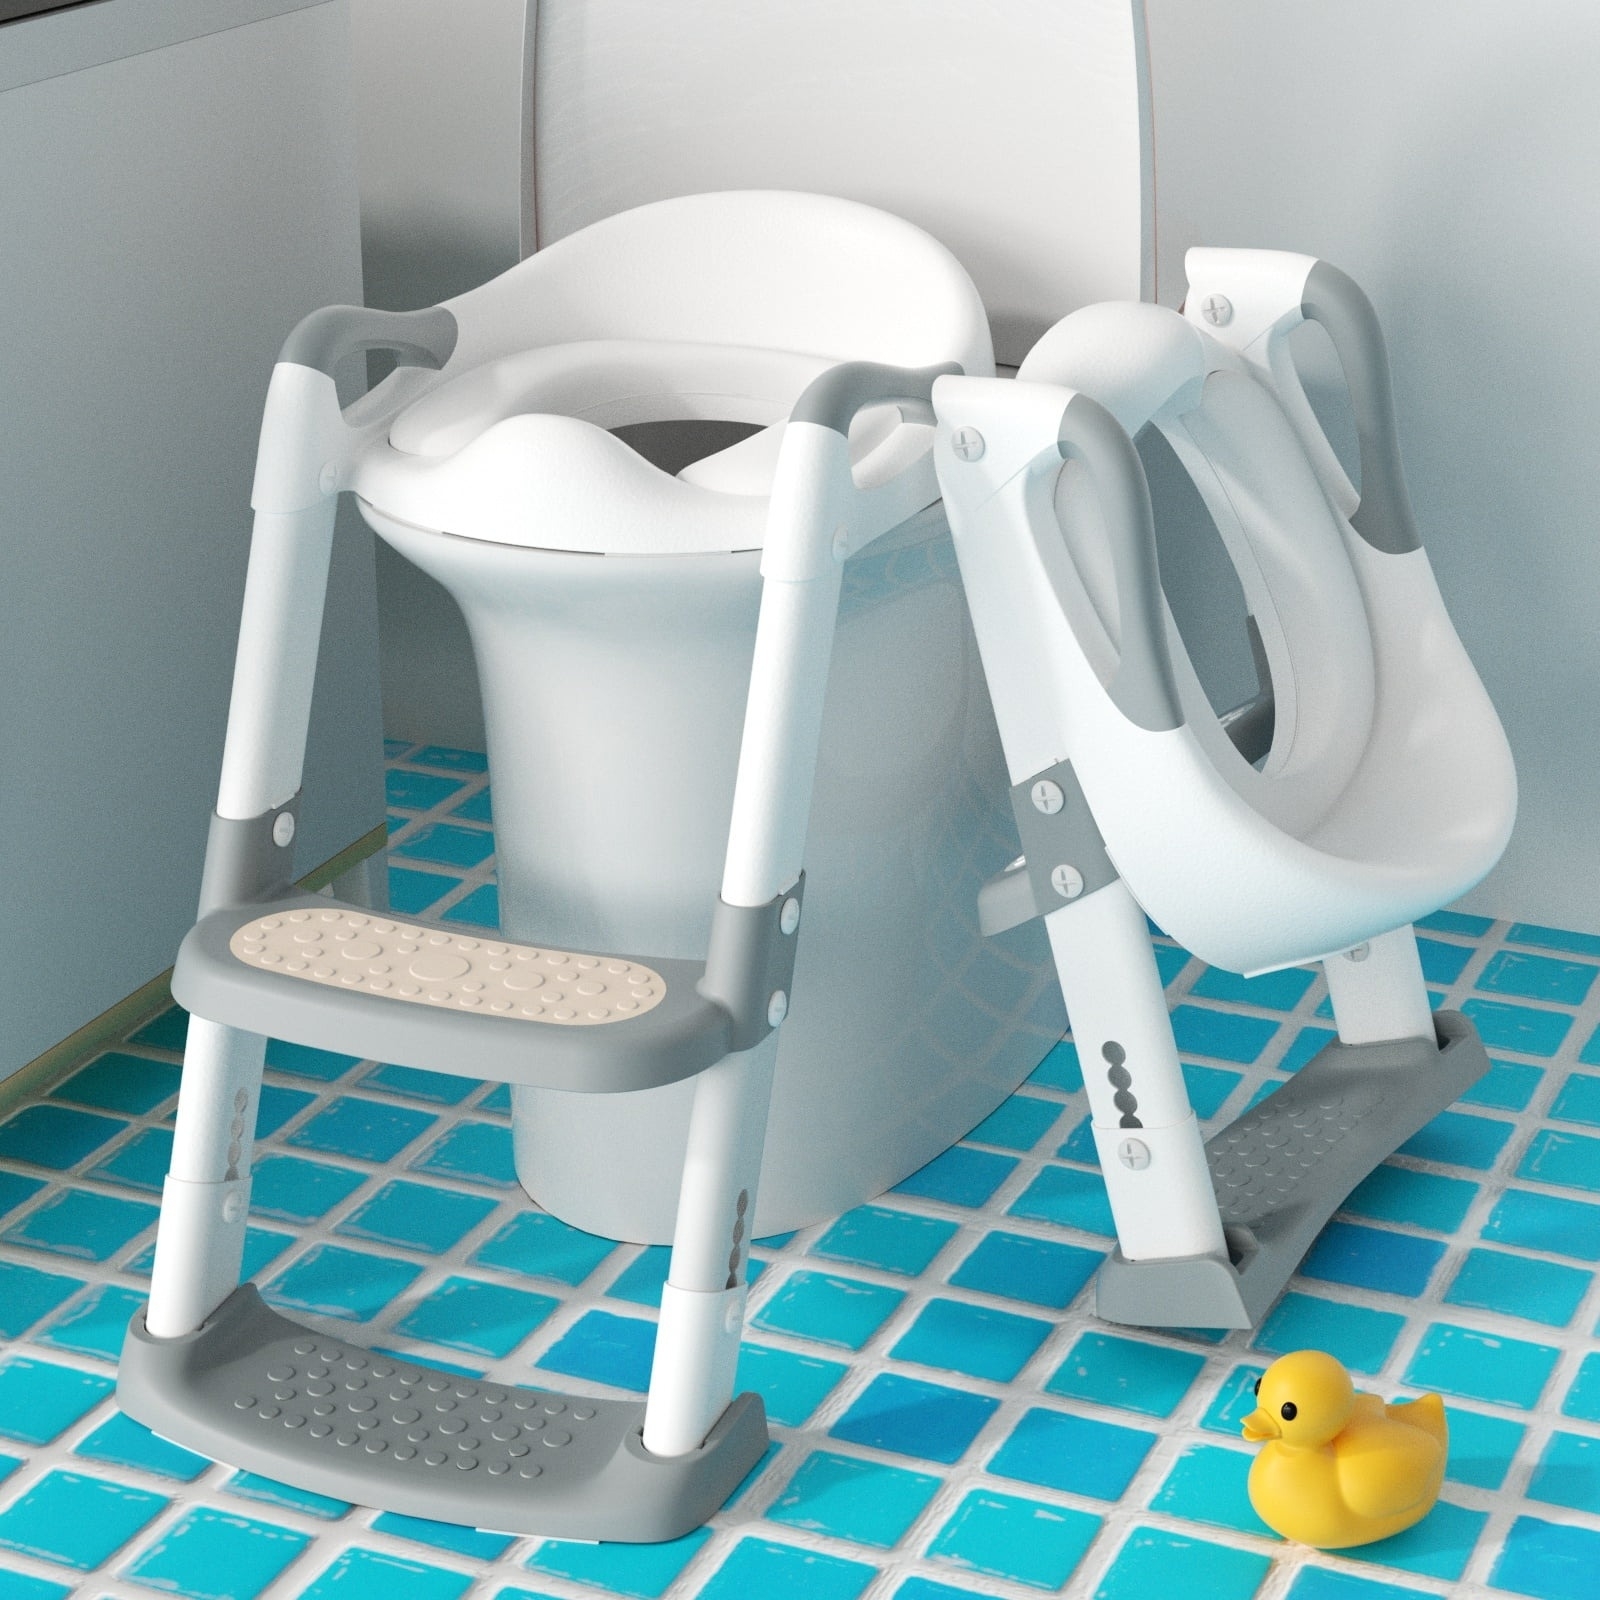 A potty seat on a toilet and folded up next to it